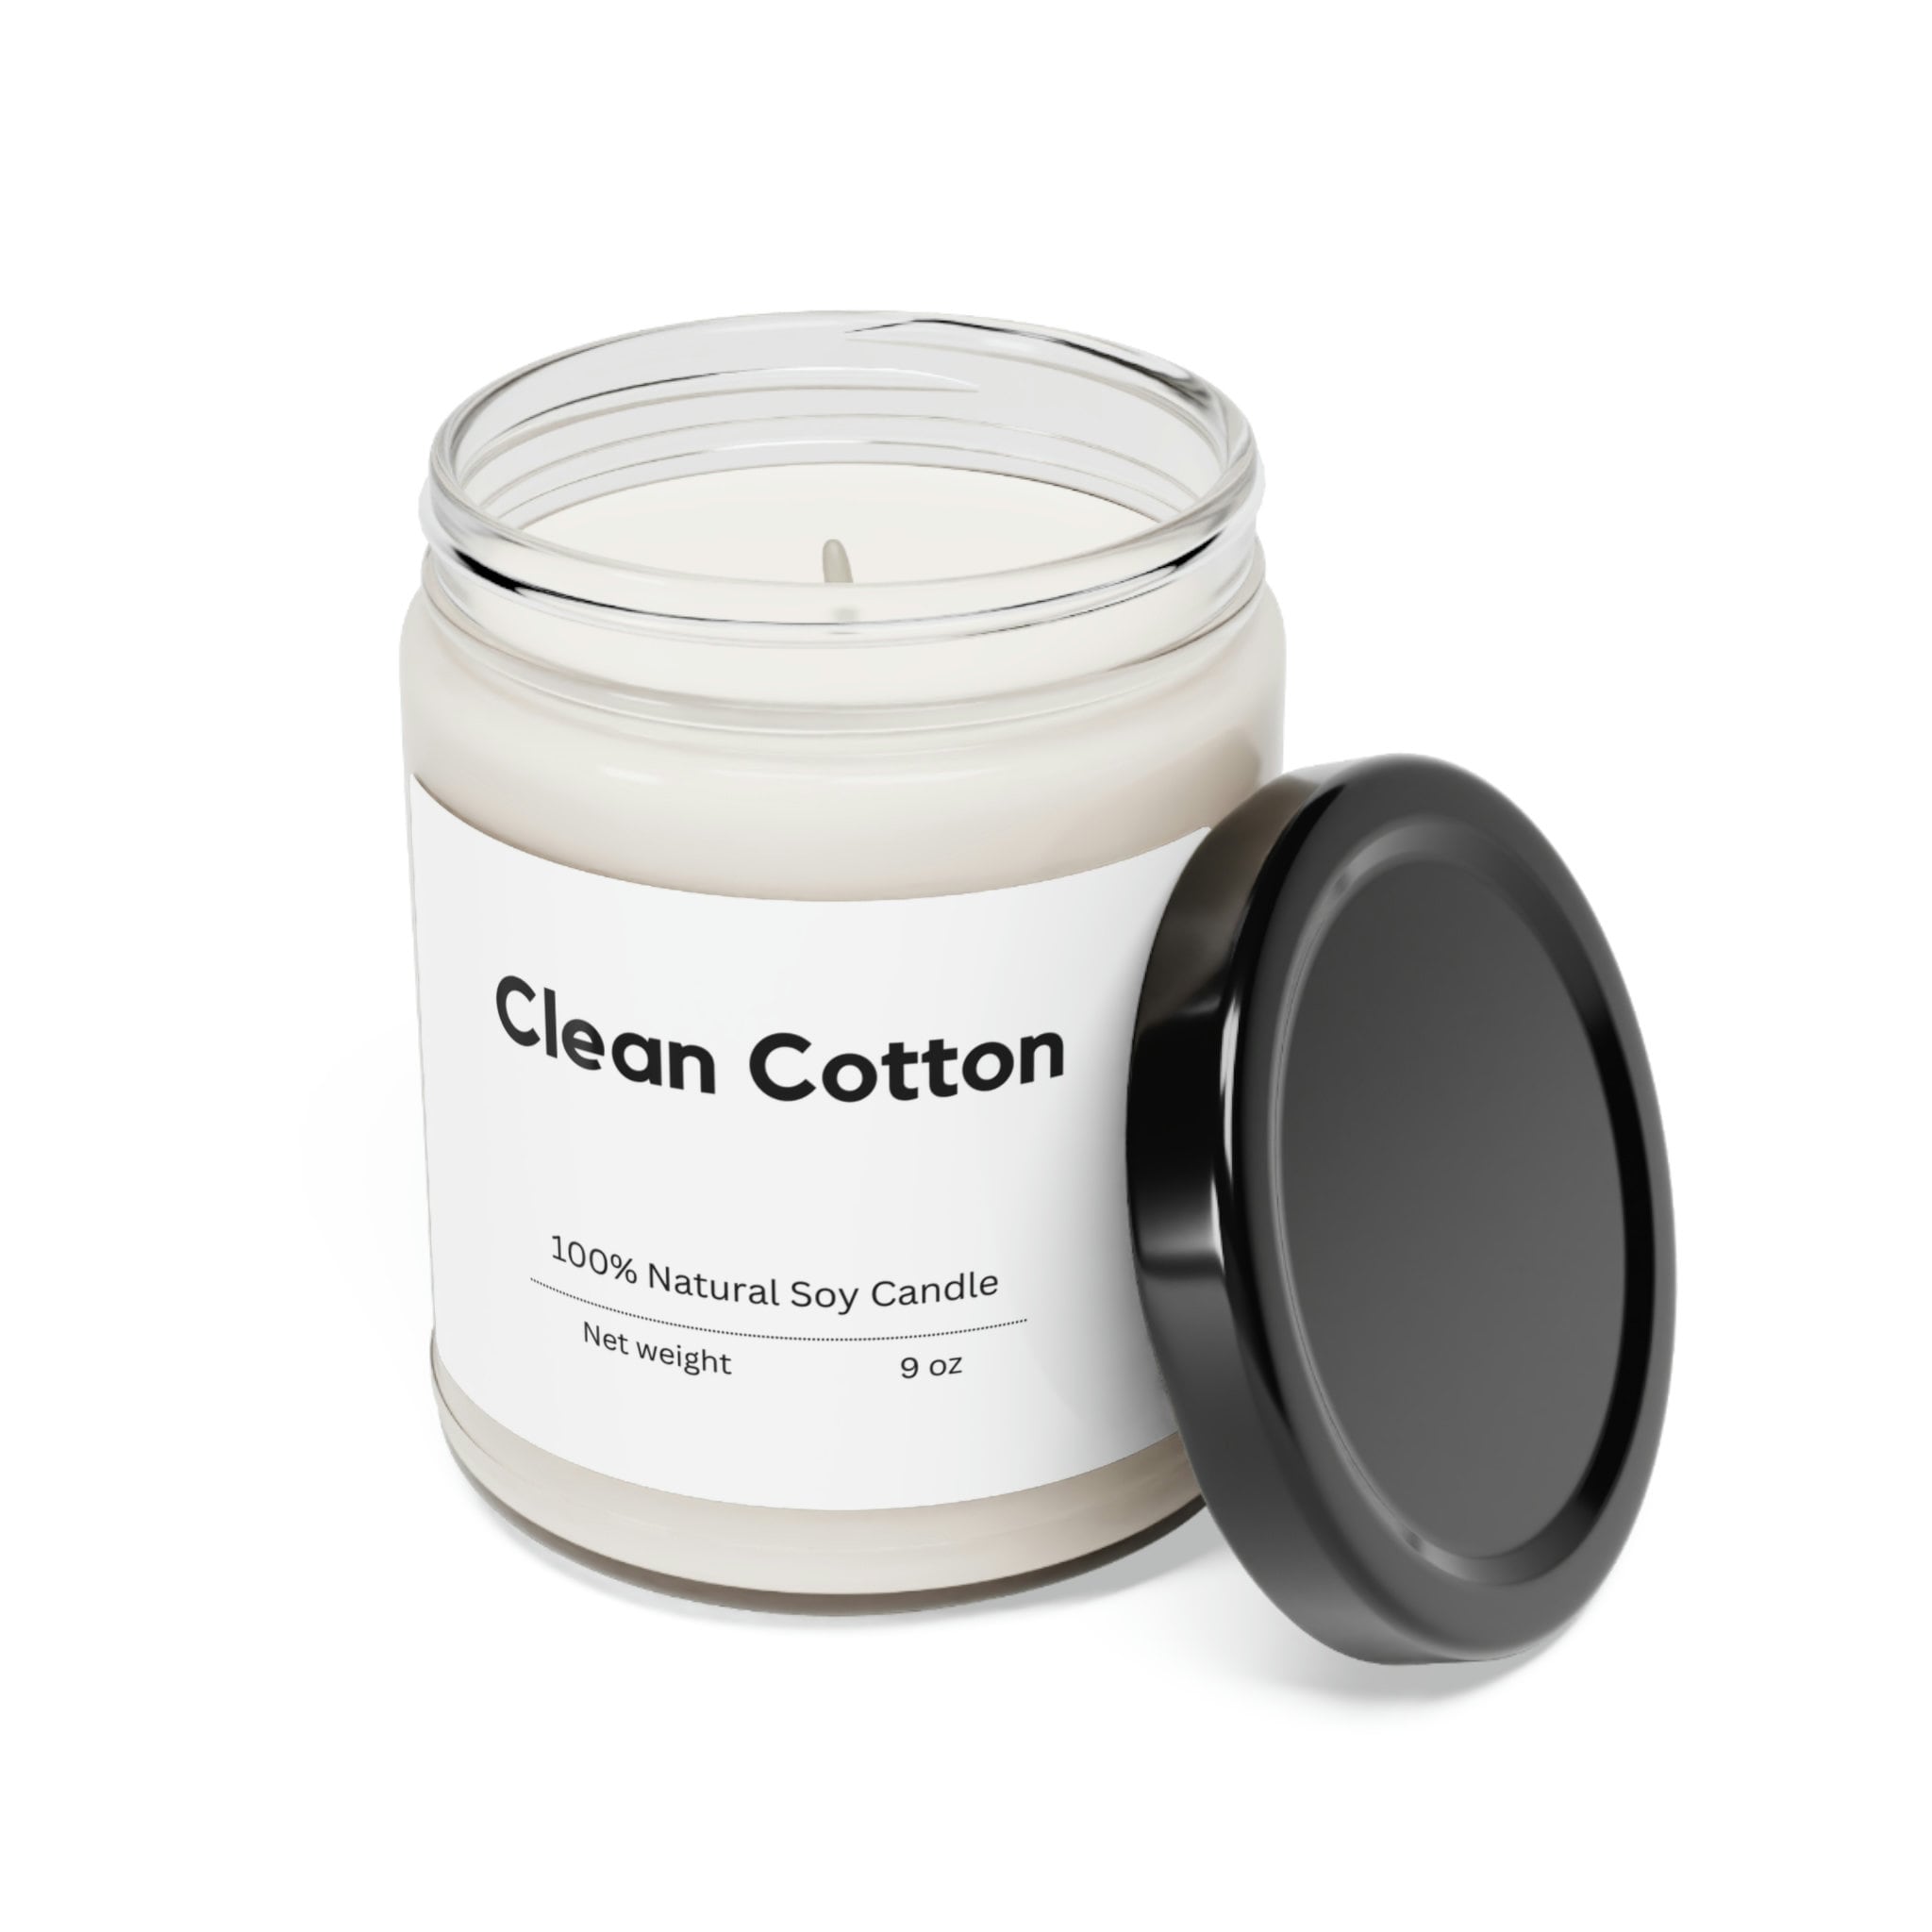 Clean Cotton Scented Candle (9 oz.)